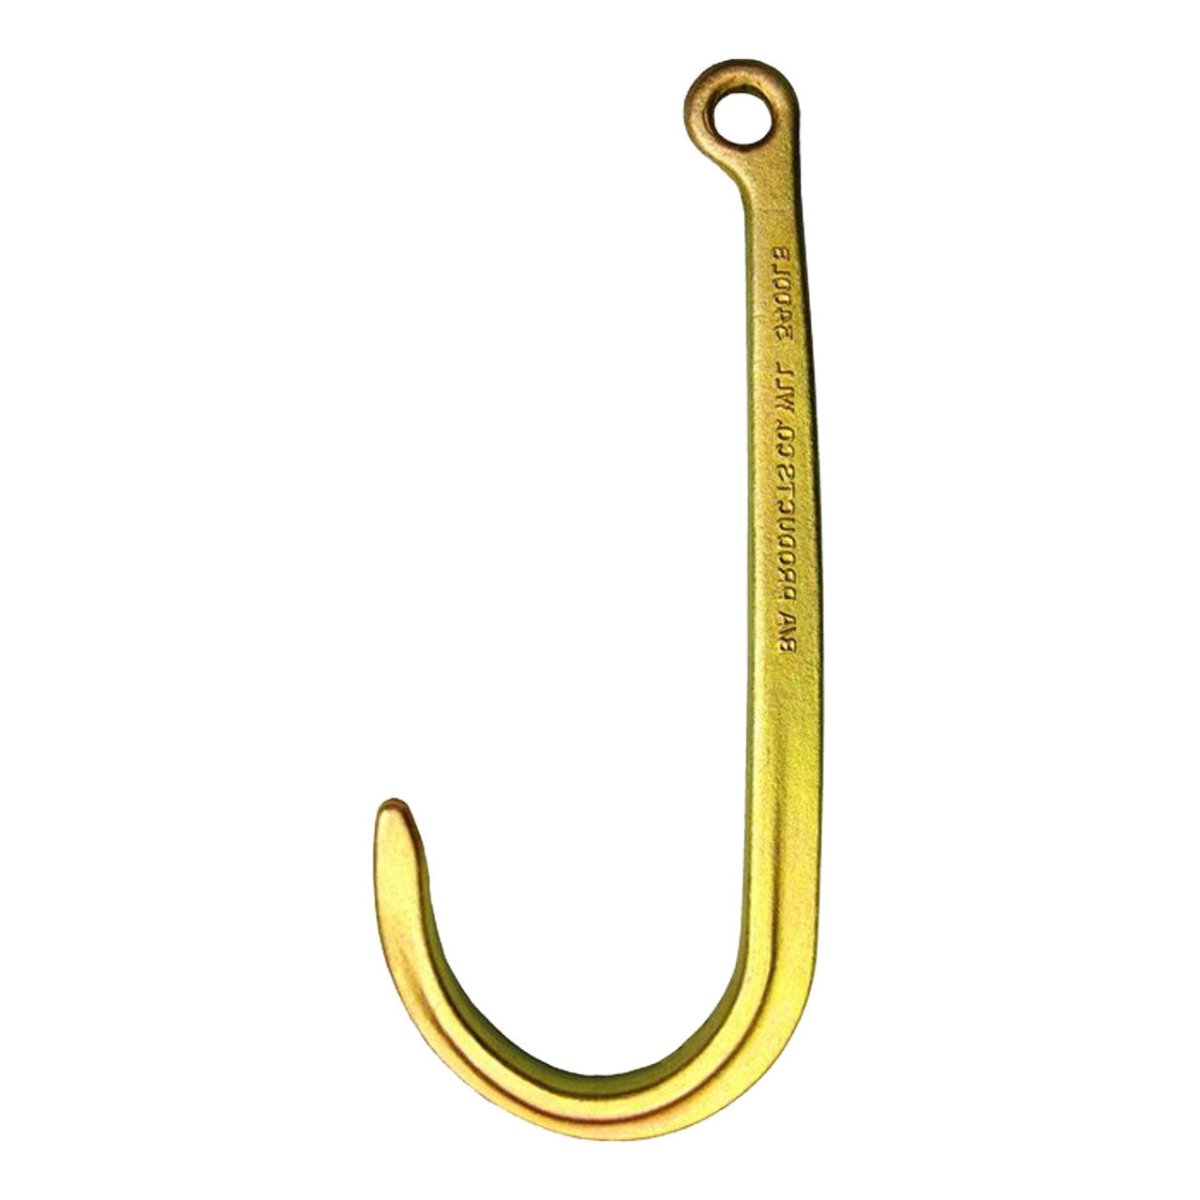 B/A Products Co. 15" Forged J Hook - N711-2 - starequipmentsales